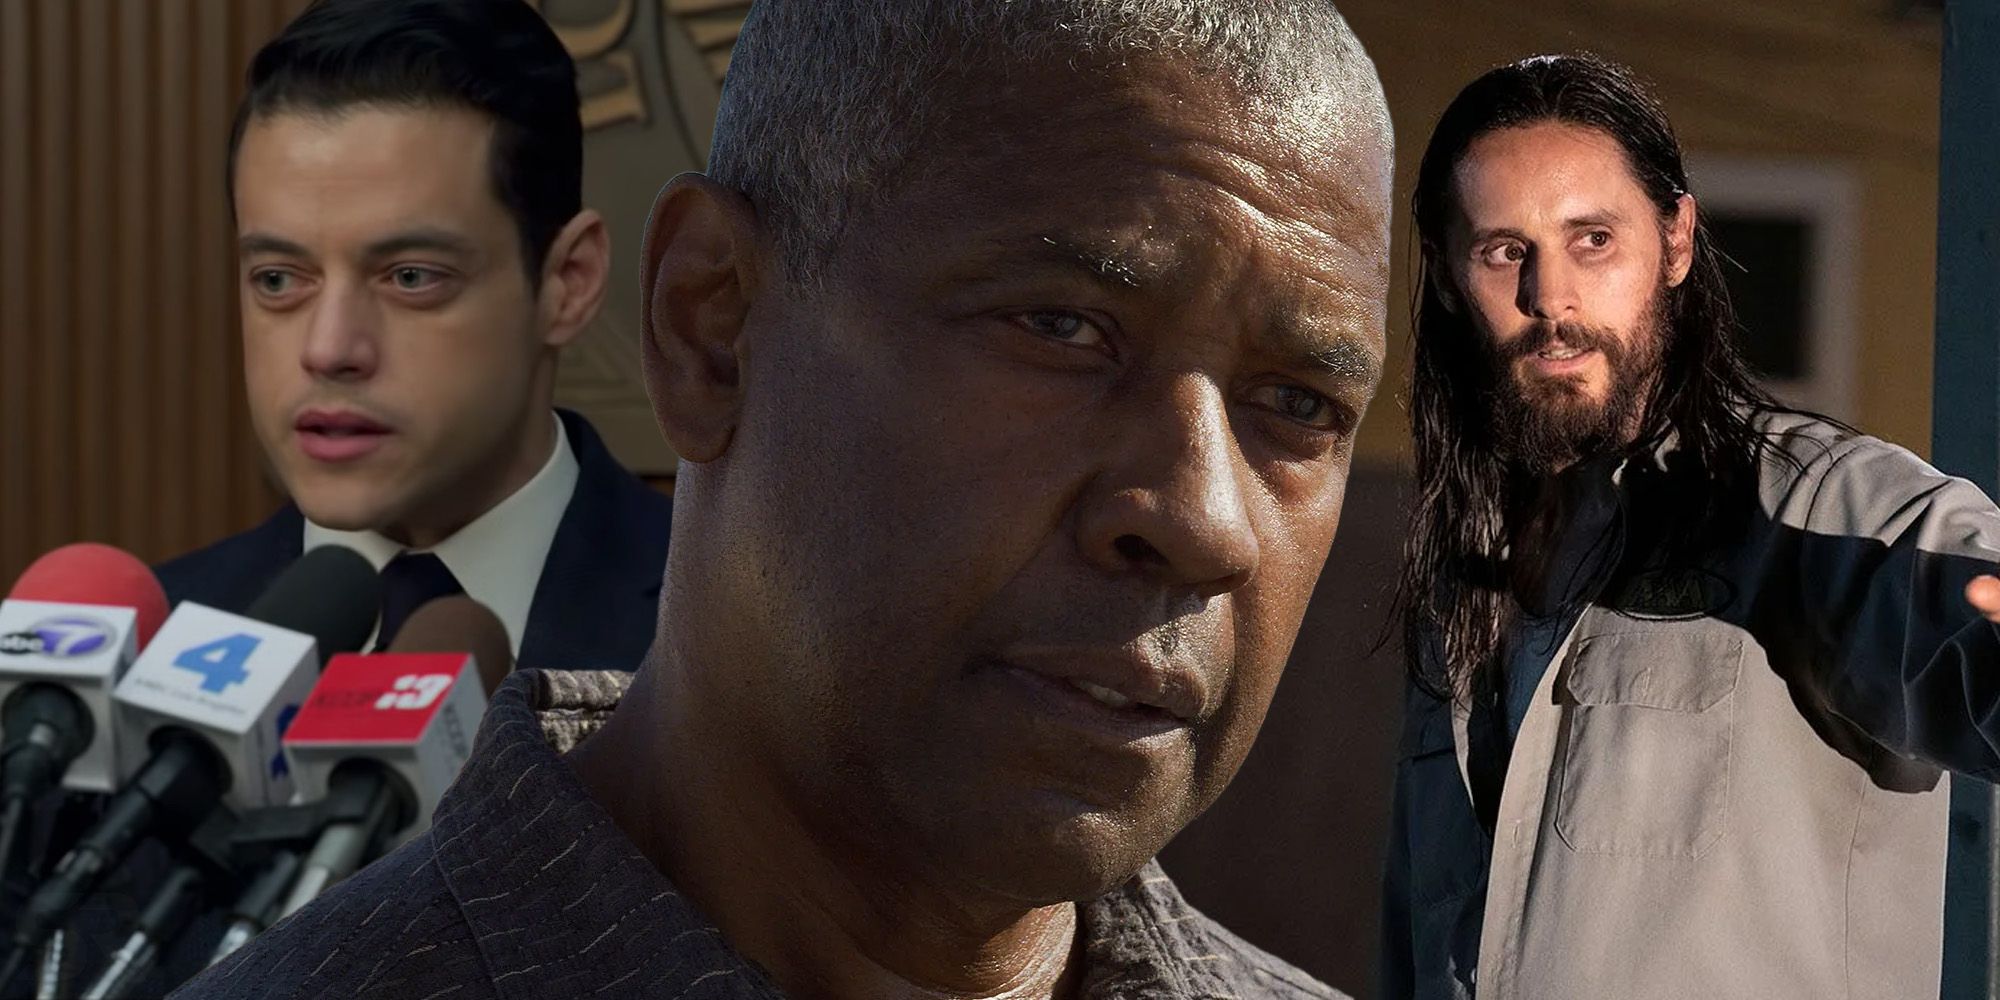 Split image of Rami Malek, Denzel Washington, and Jared Leto in The Little Things